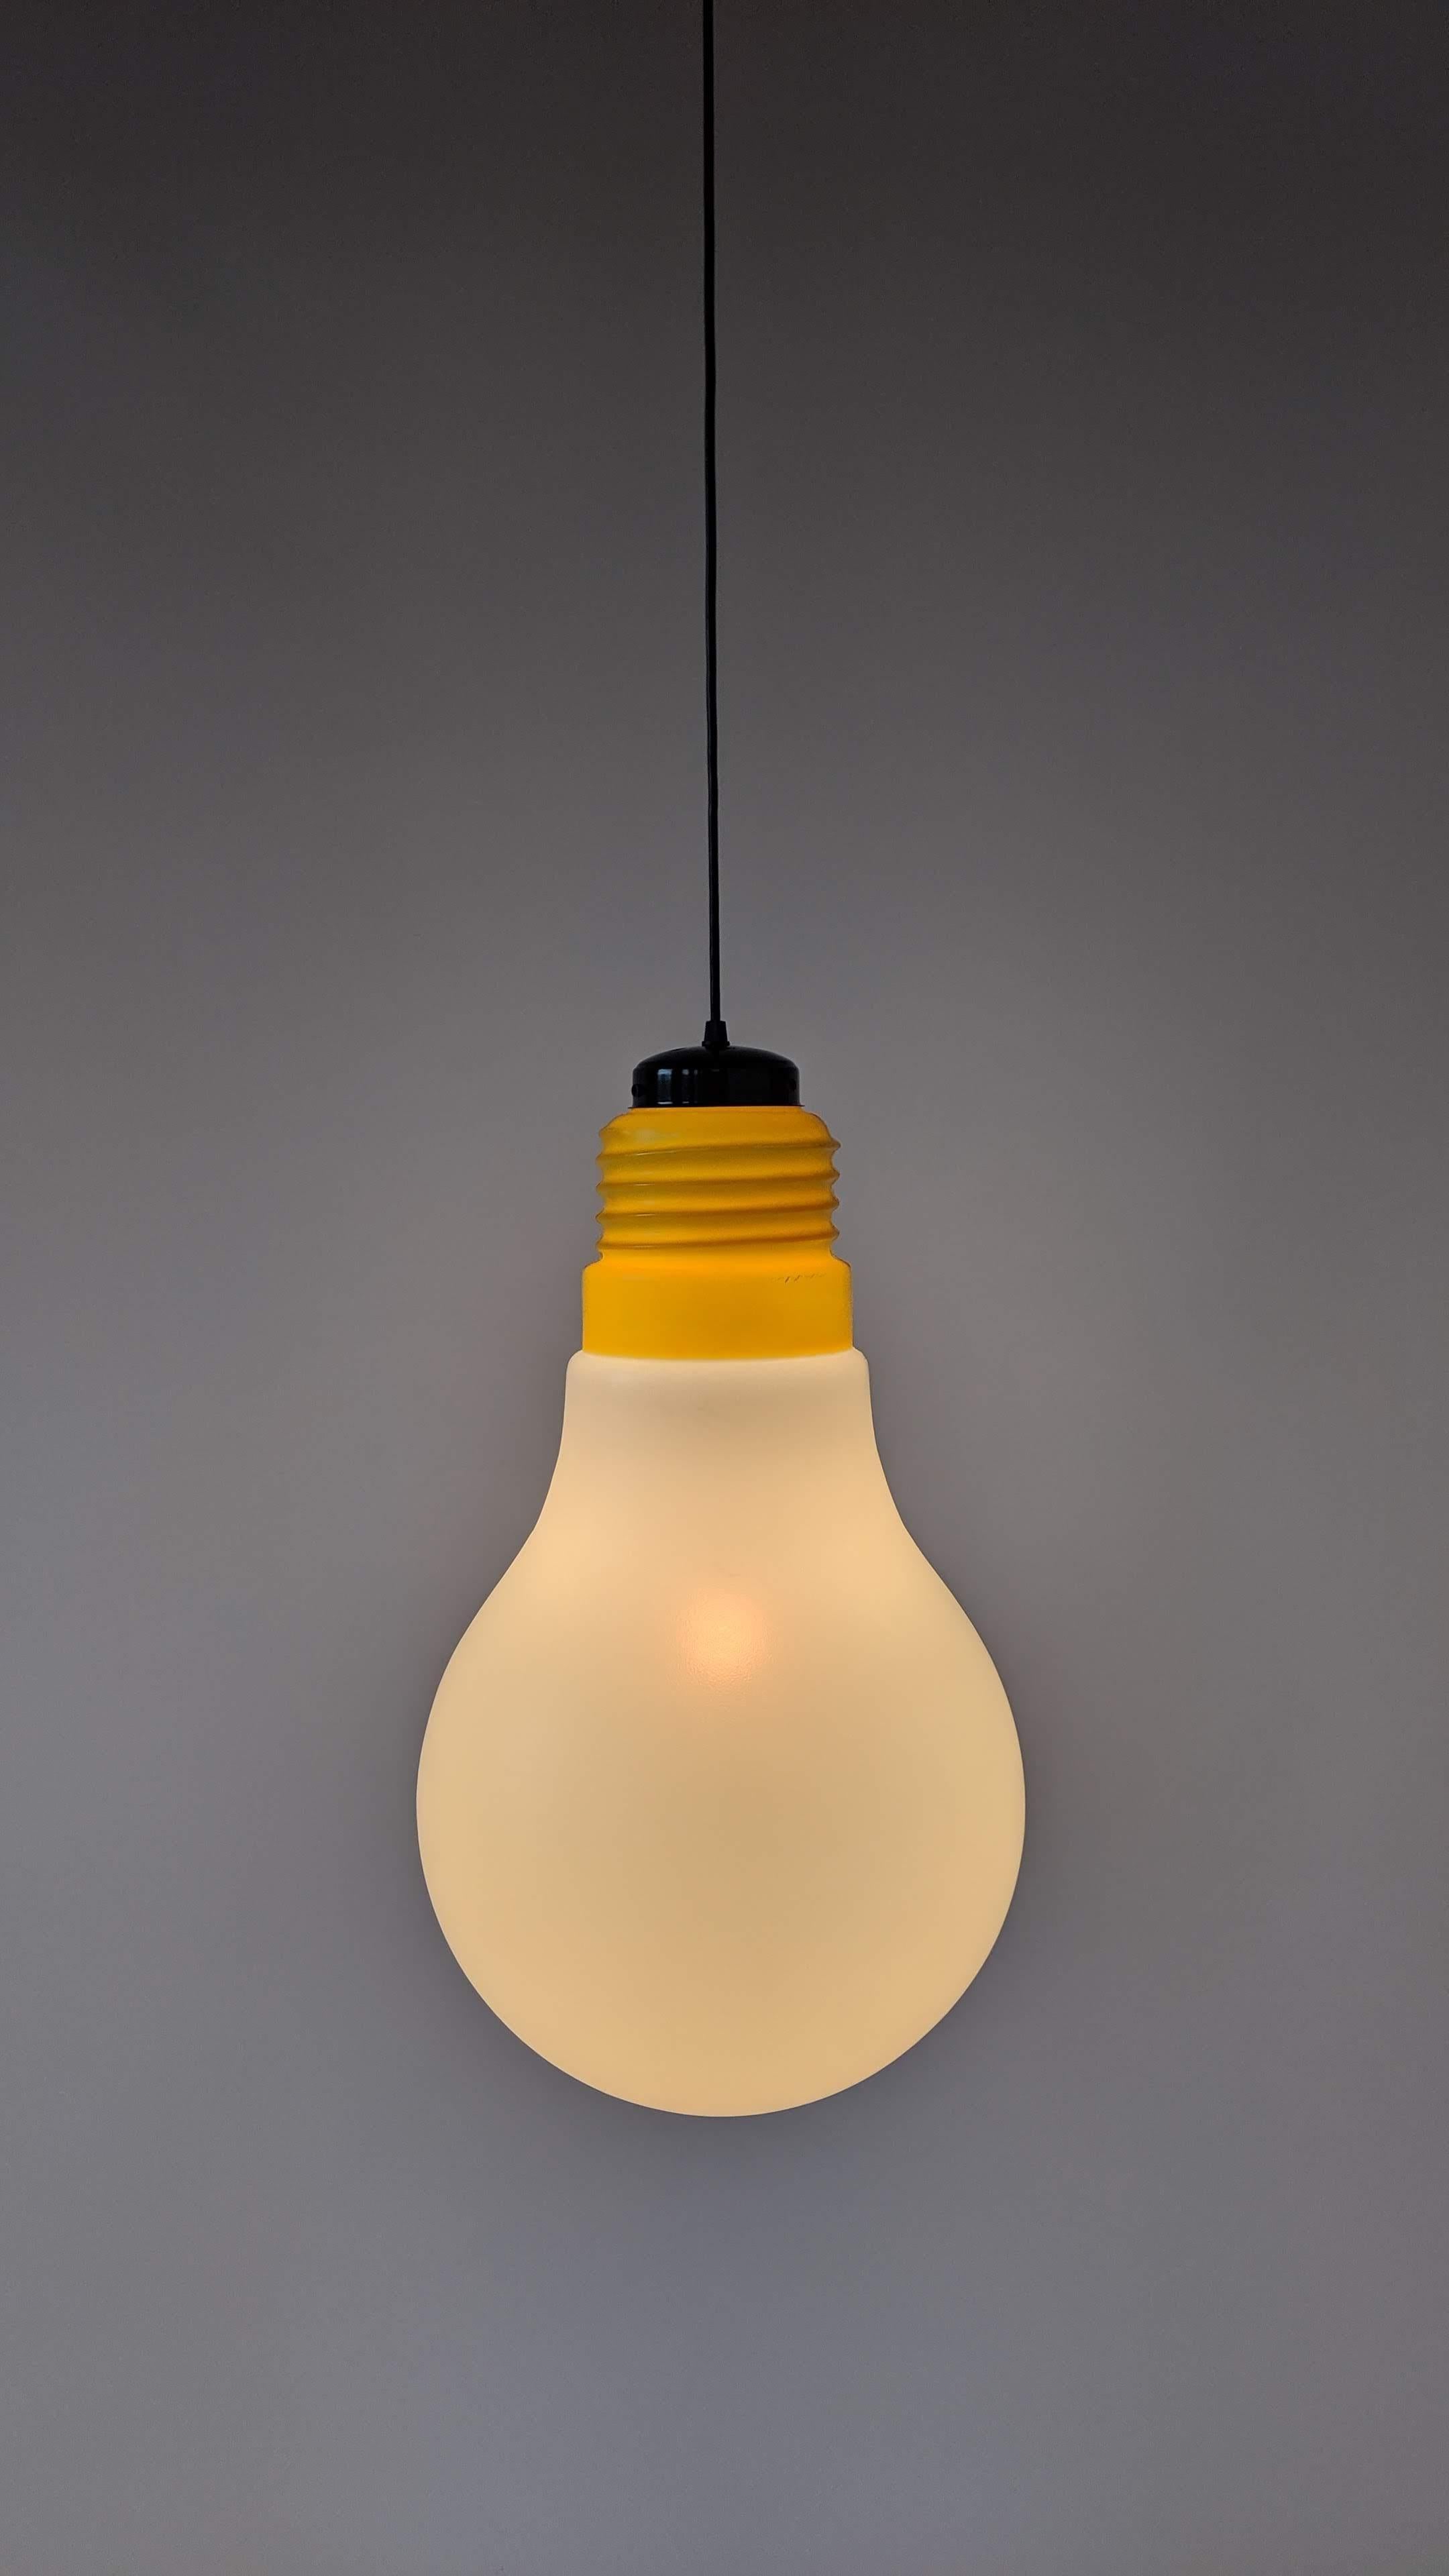 Iconic oversize 'Bulb Bulb' could be hang from the ceiling or lay loose on the floor. 

Contain one regular E26 size socket rated at 60 watts. 

Your choice of 12 feet long new black cord with wall plug for swag or canopy ready to connect to